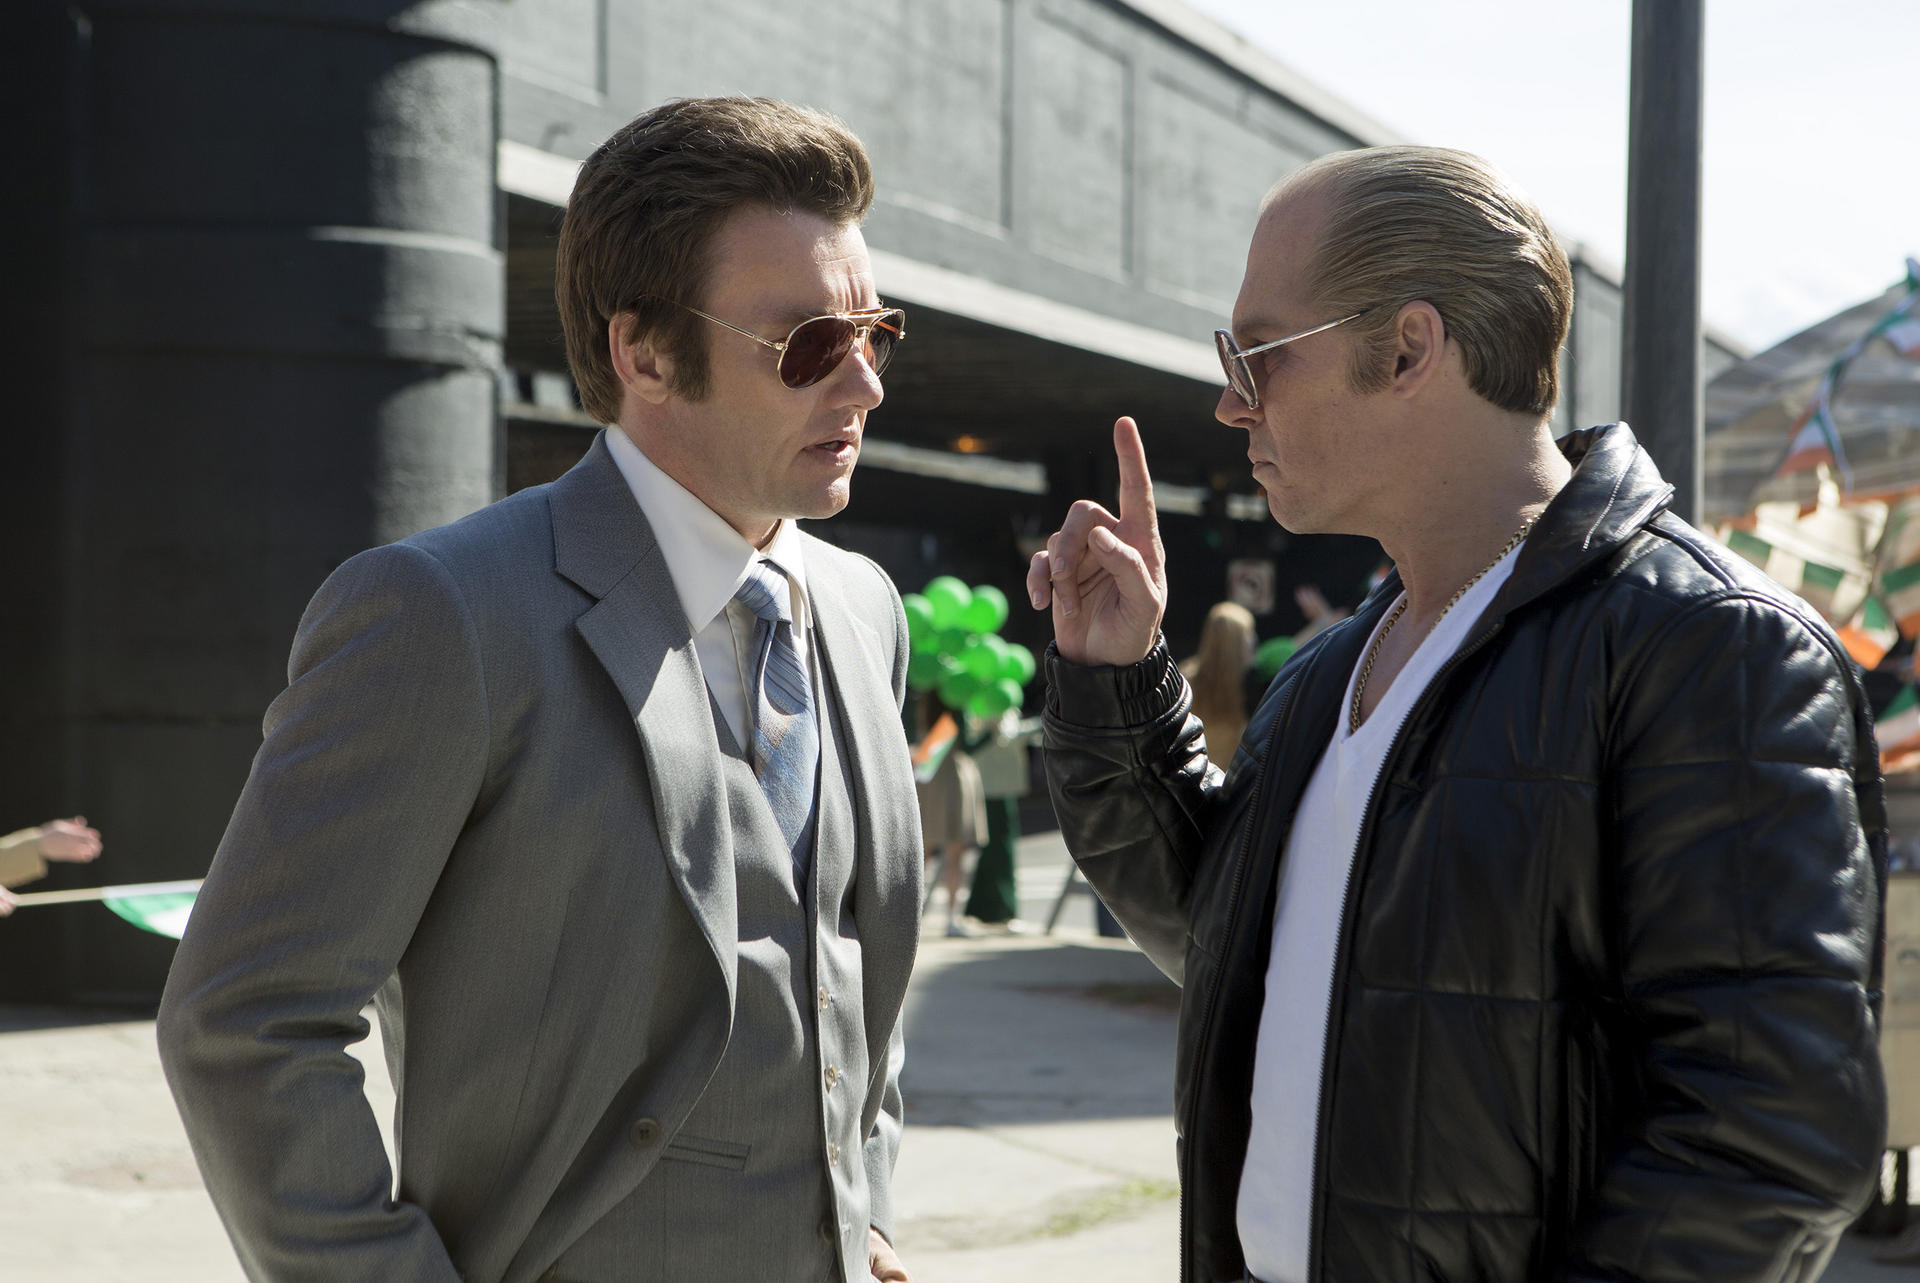 Joel Edgerton (left) and Johnny Depp in a scene from Black Mass, the film about Boston gangster James 'Whitey' Bulger. Photo: AP